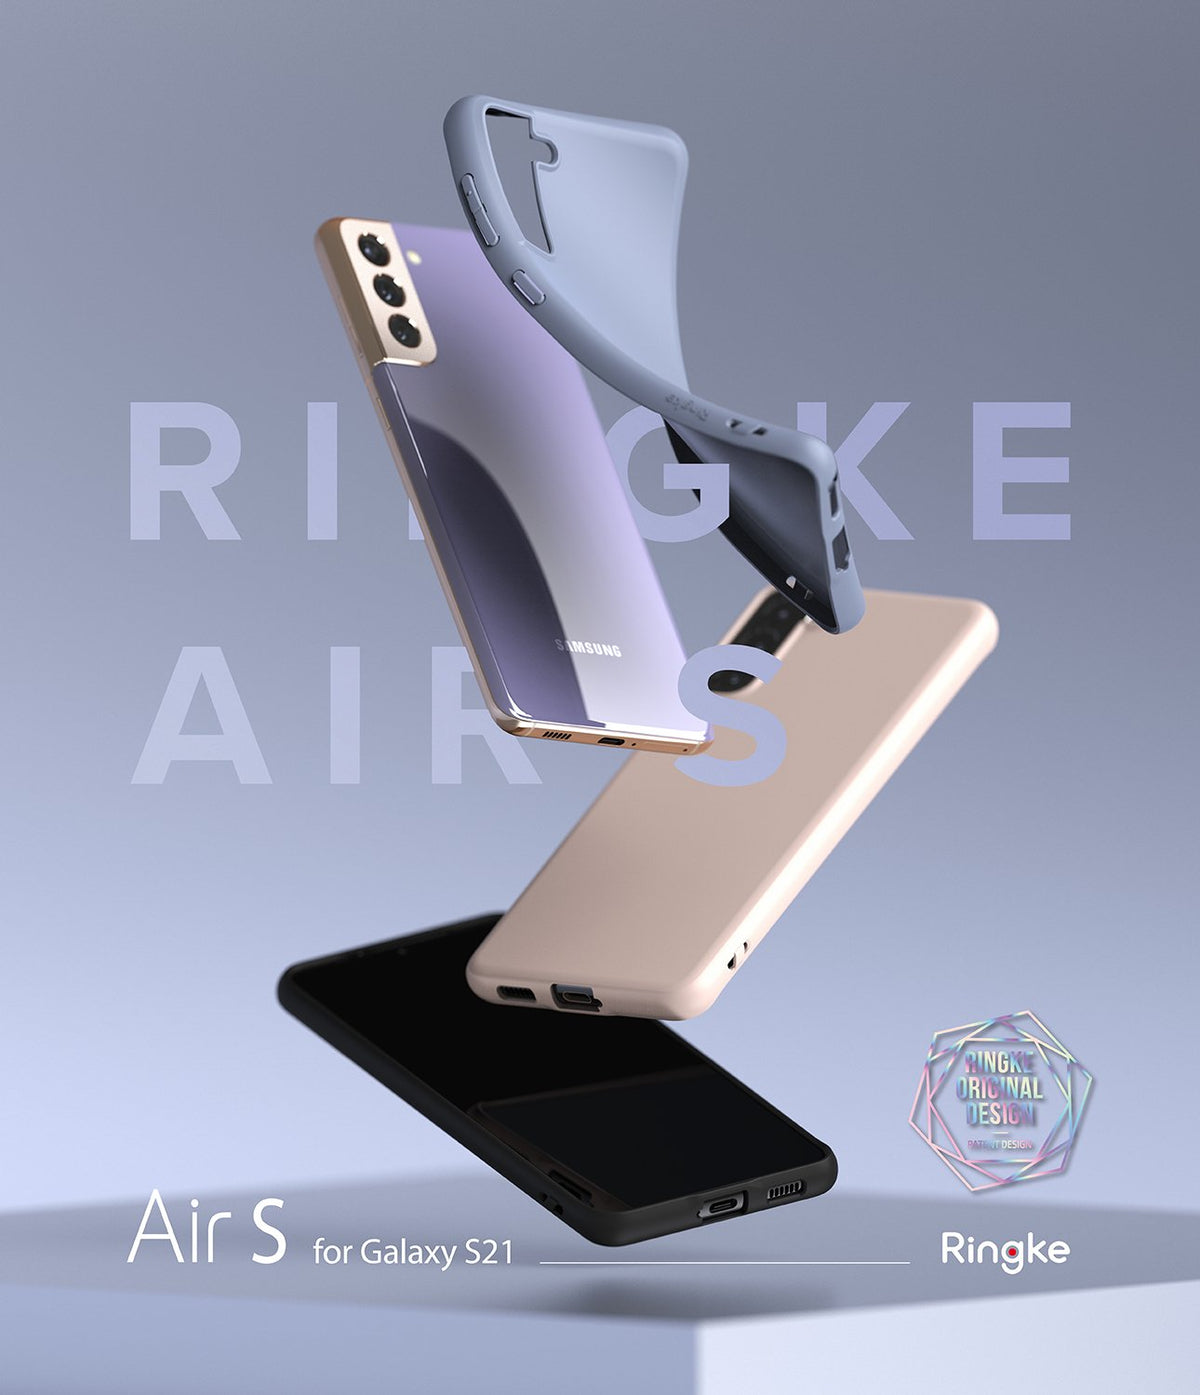 Ringke Air-S Galaxy S21 / S21 Ultra Case Cover